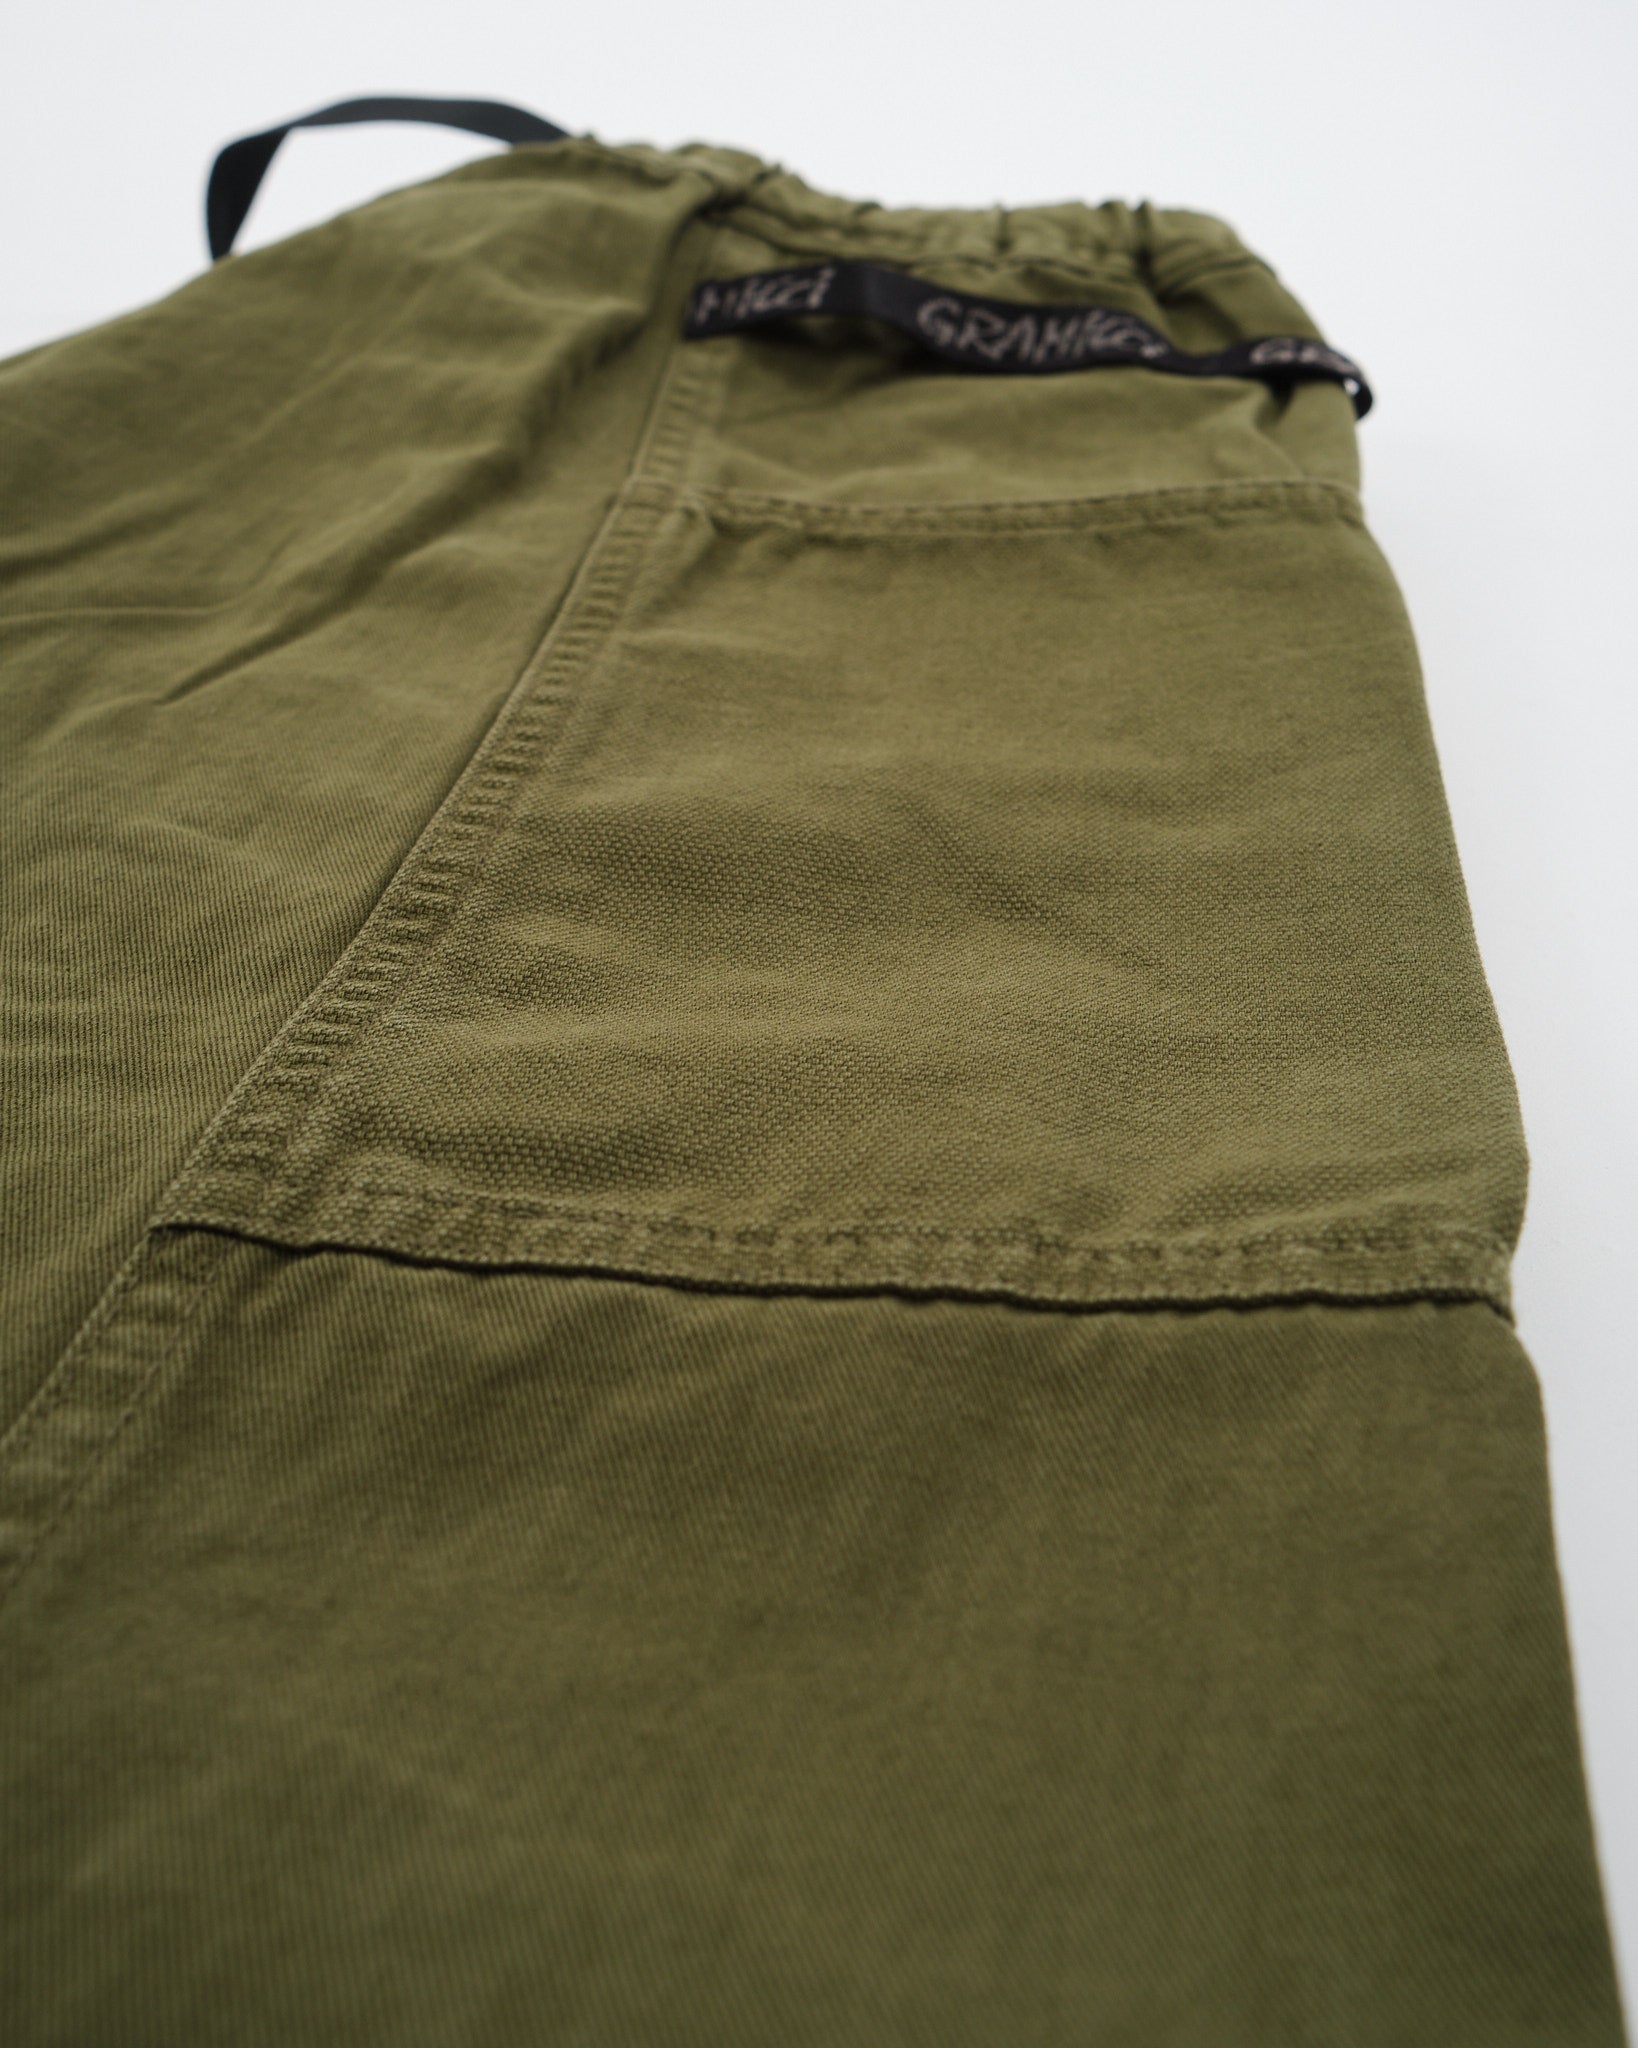 Gadget Pant Olive - Meadow